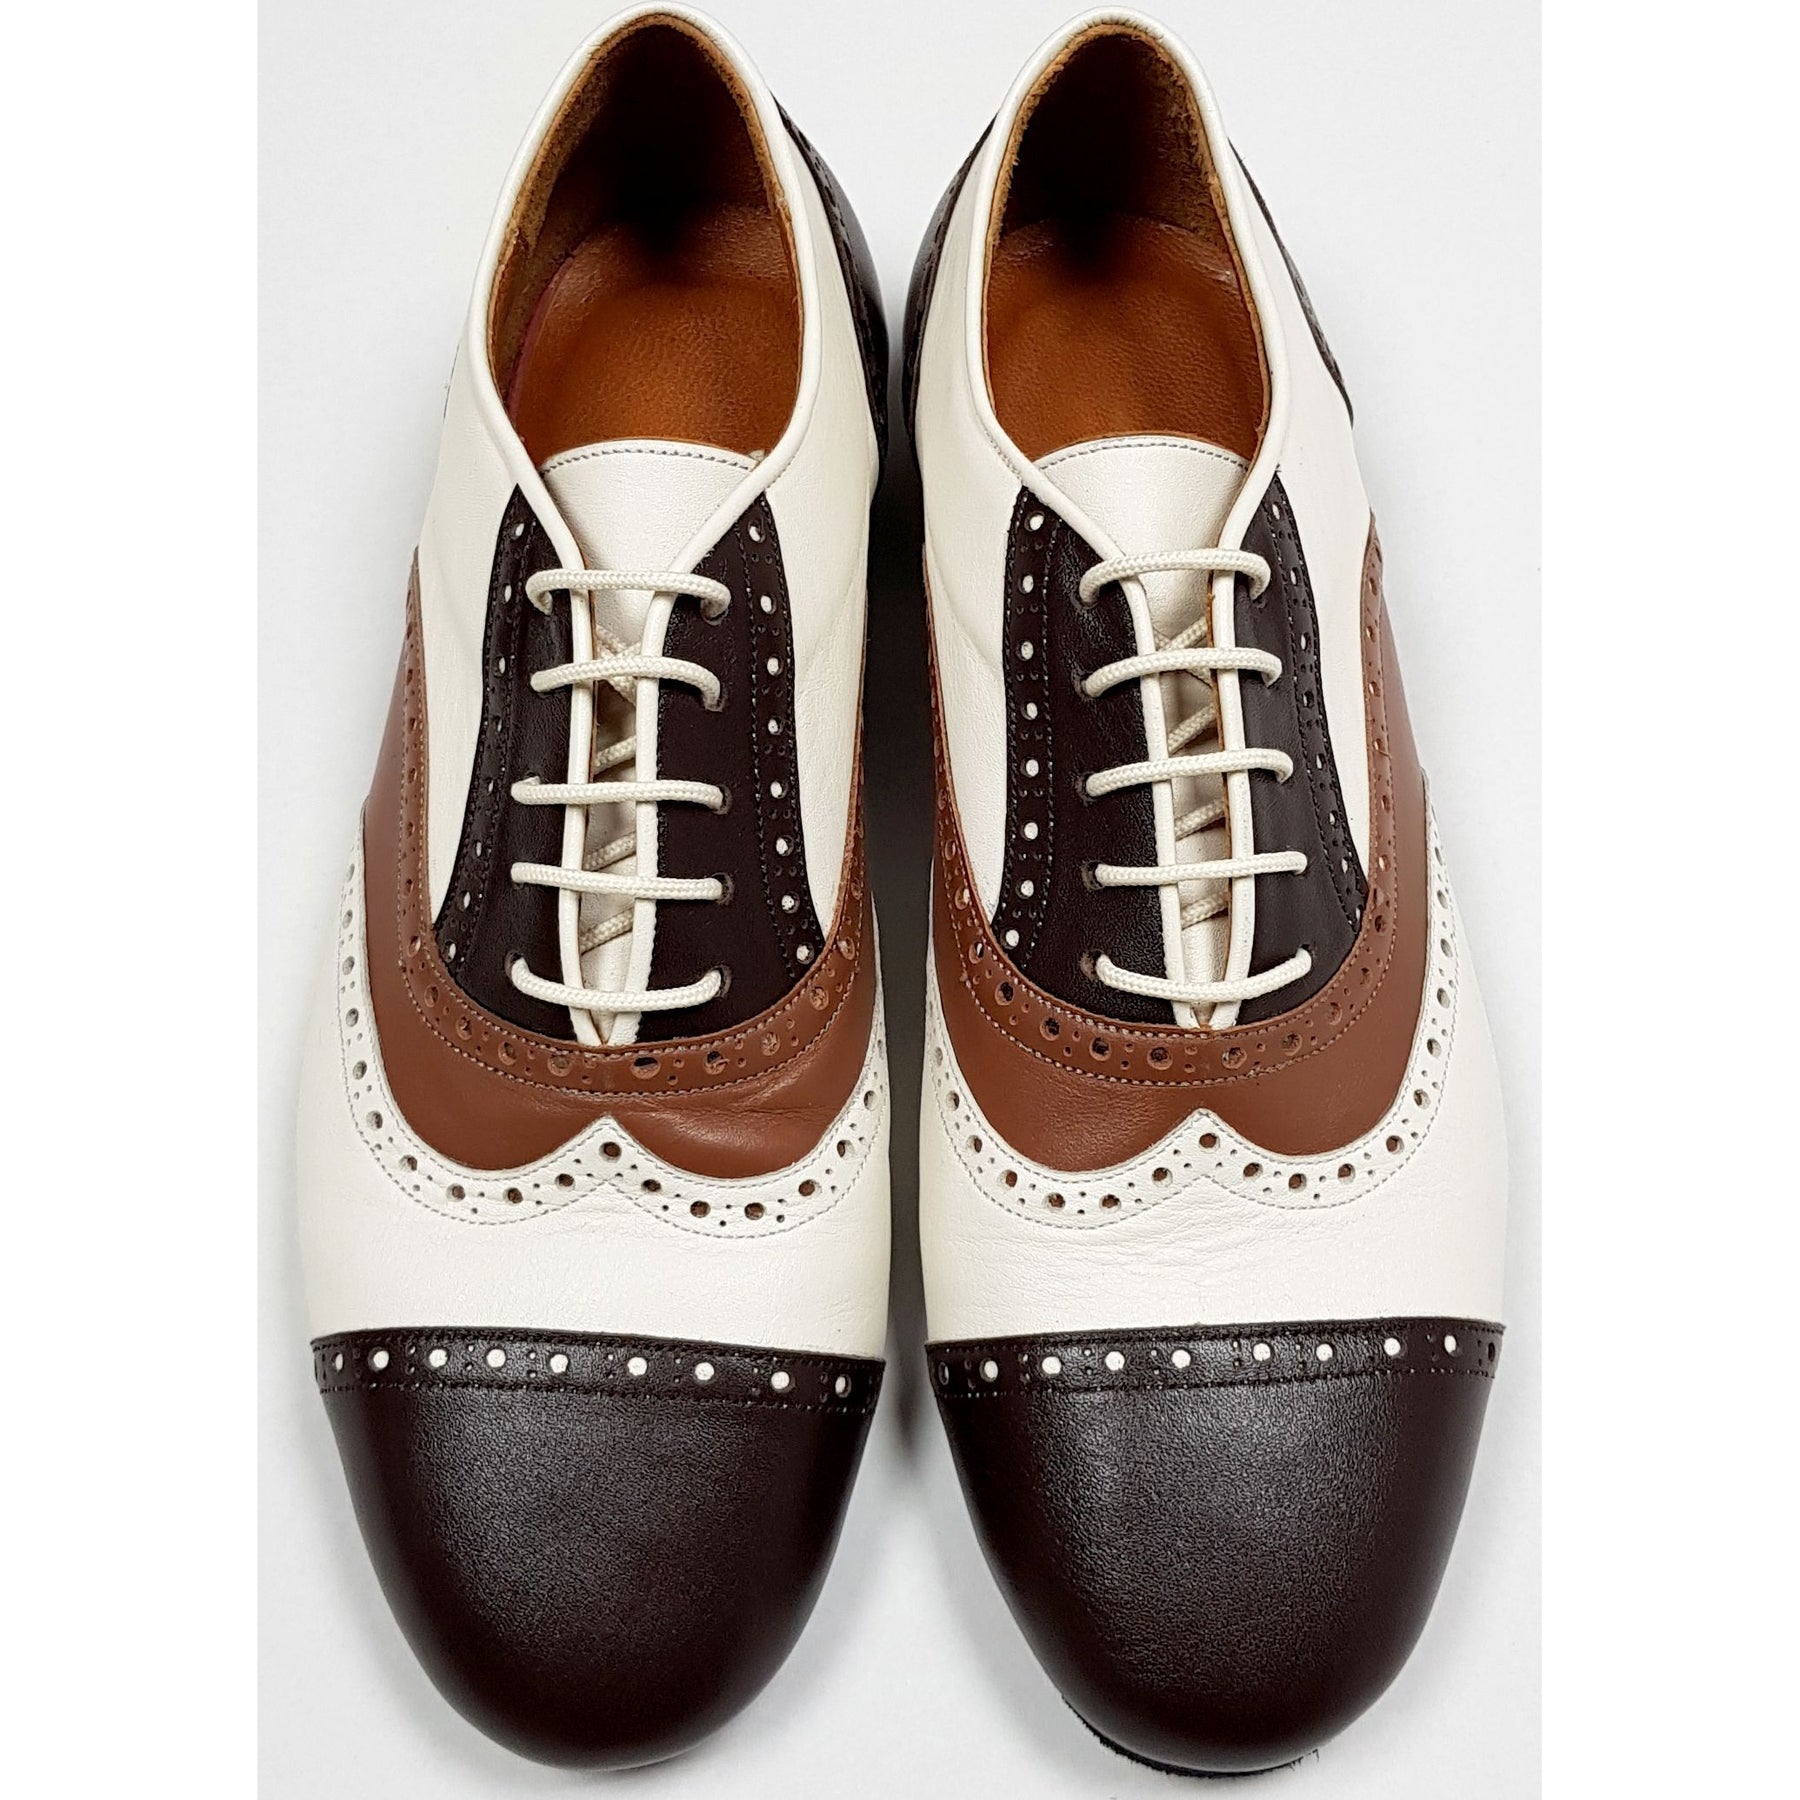 Italian Tango Shoes for Men: Canaro - Cream, Tan and Black Leather by ...